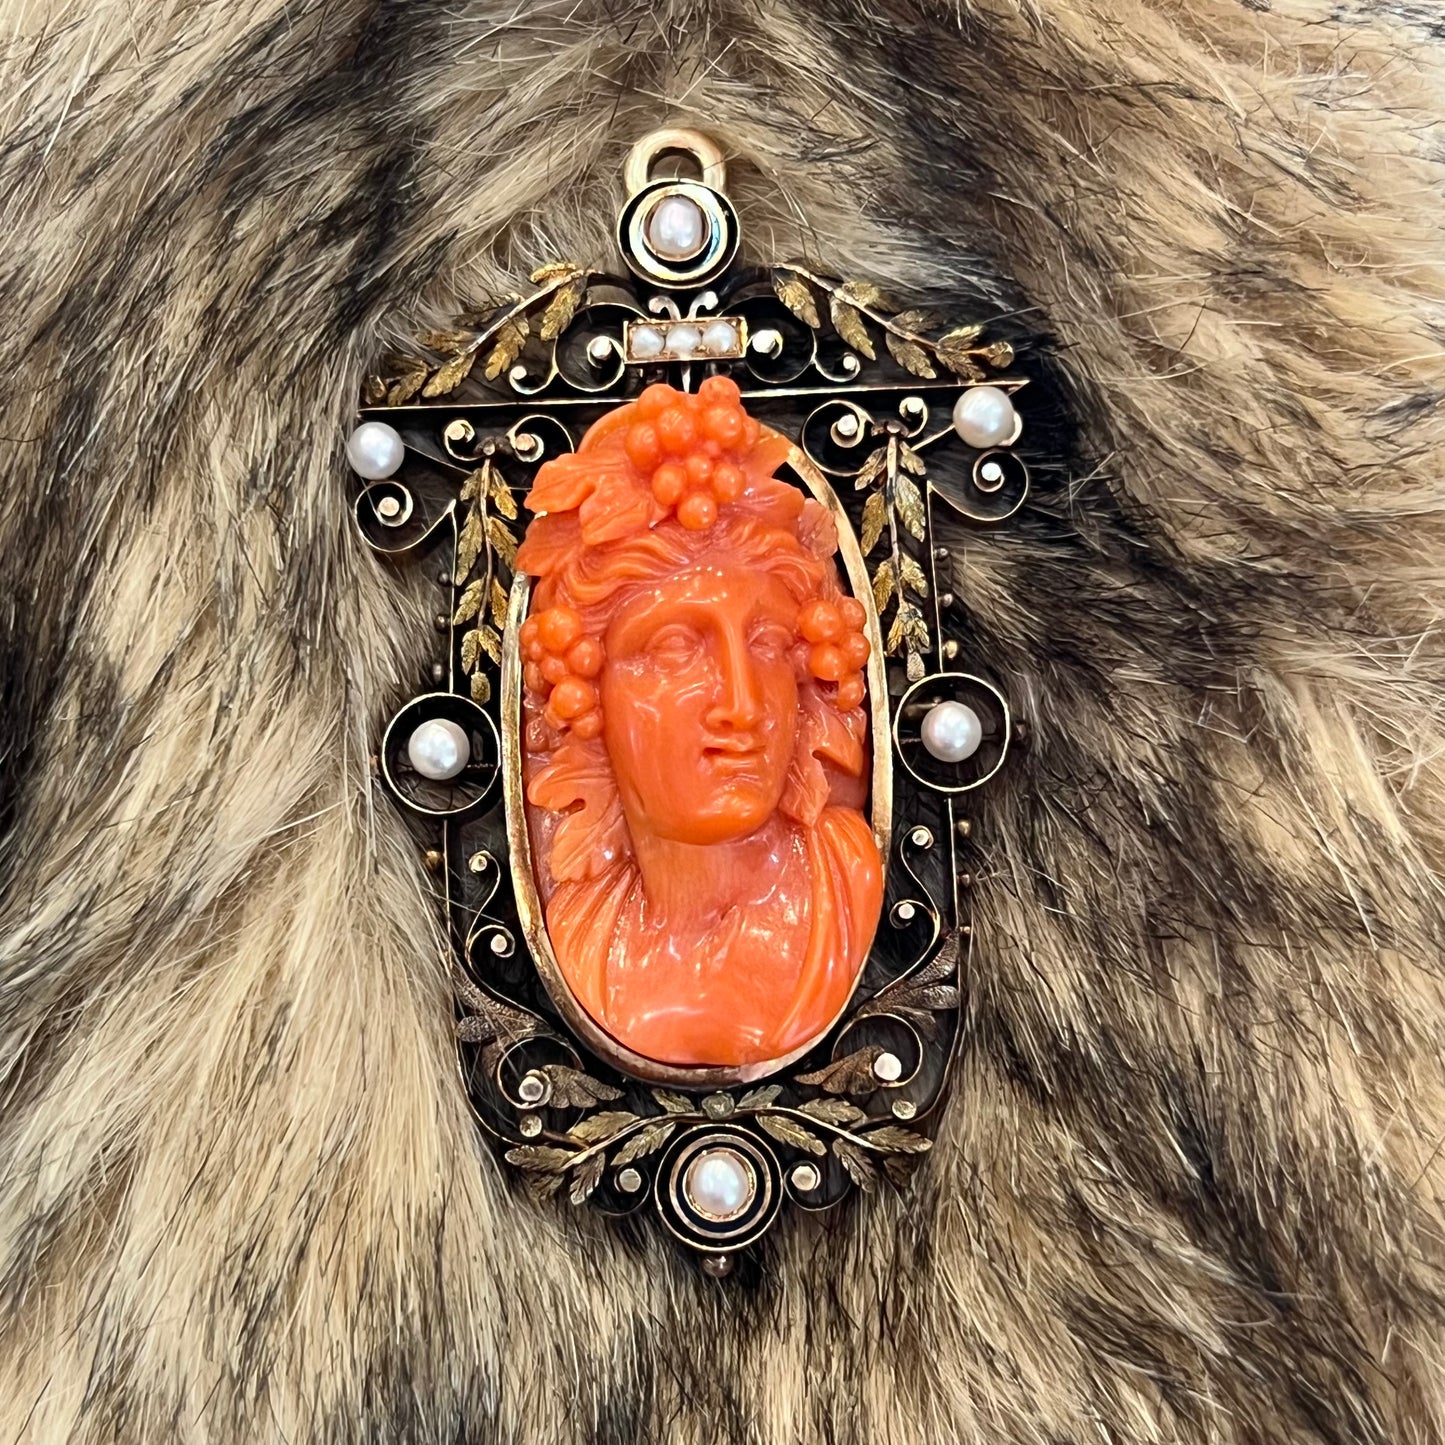 Victorian Carved Coral Cameo Pendant in Yellow Gold